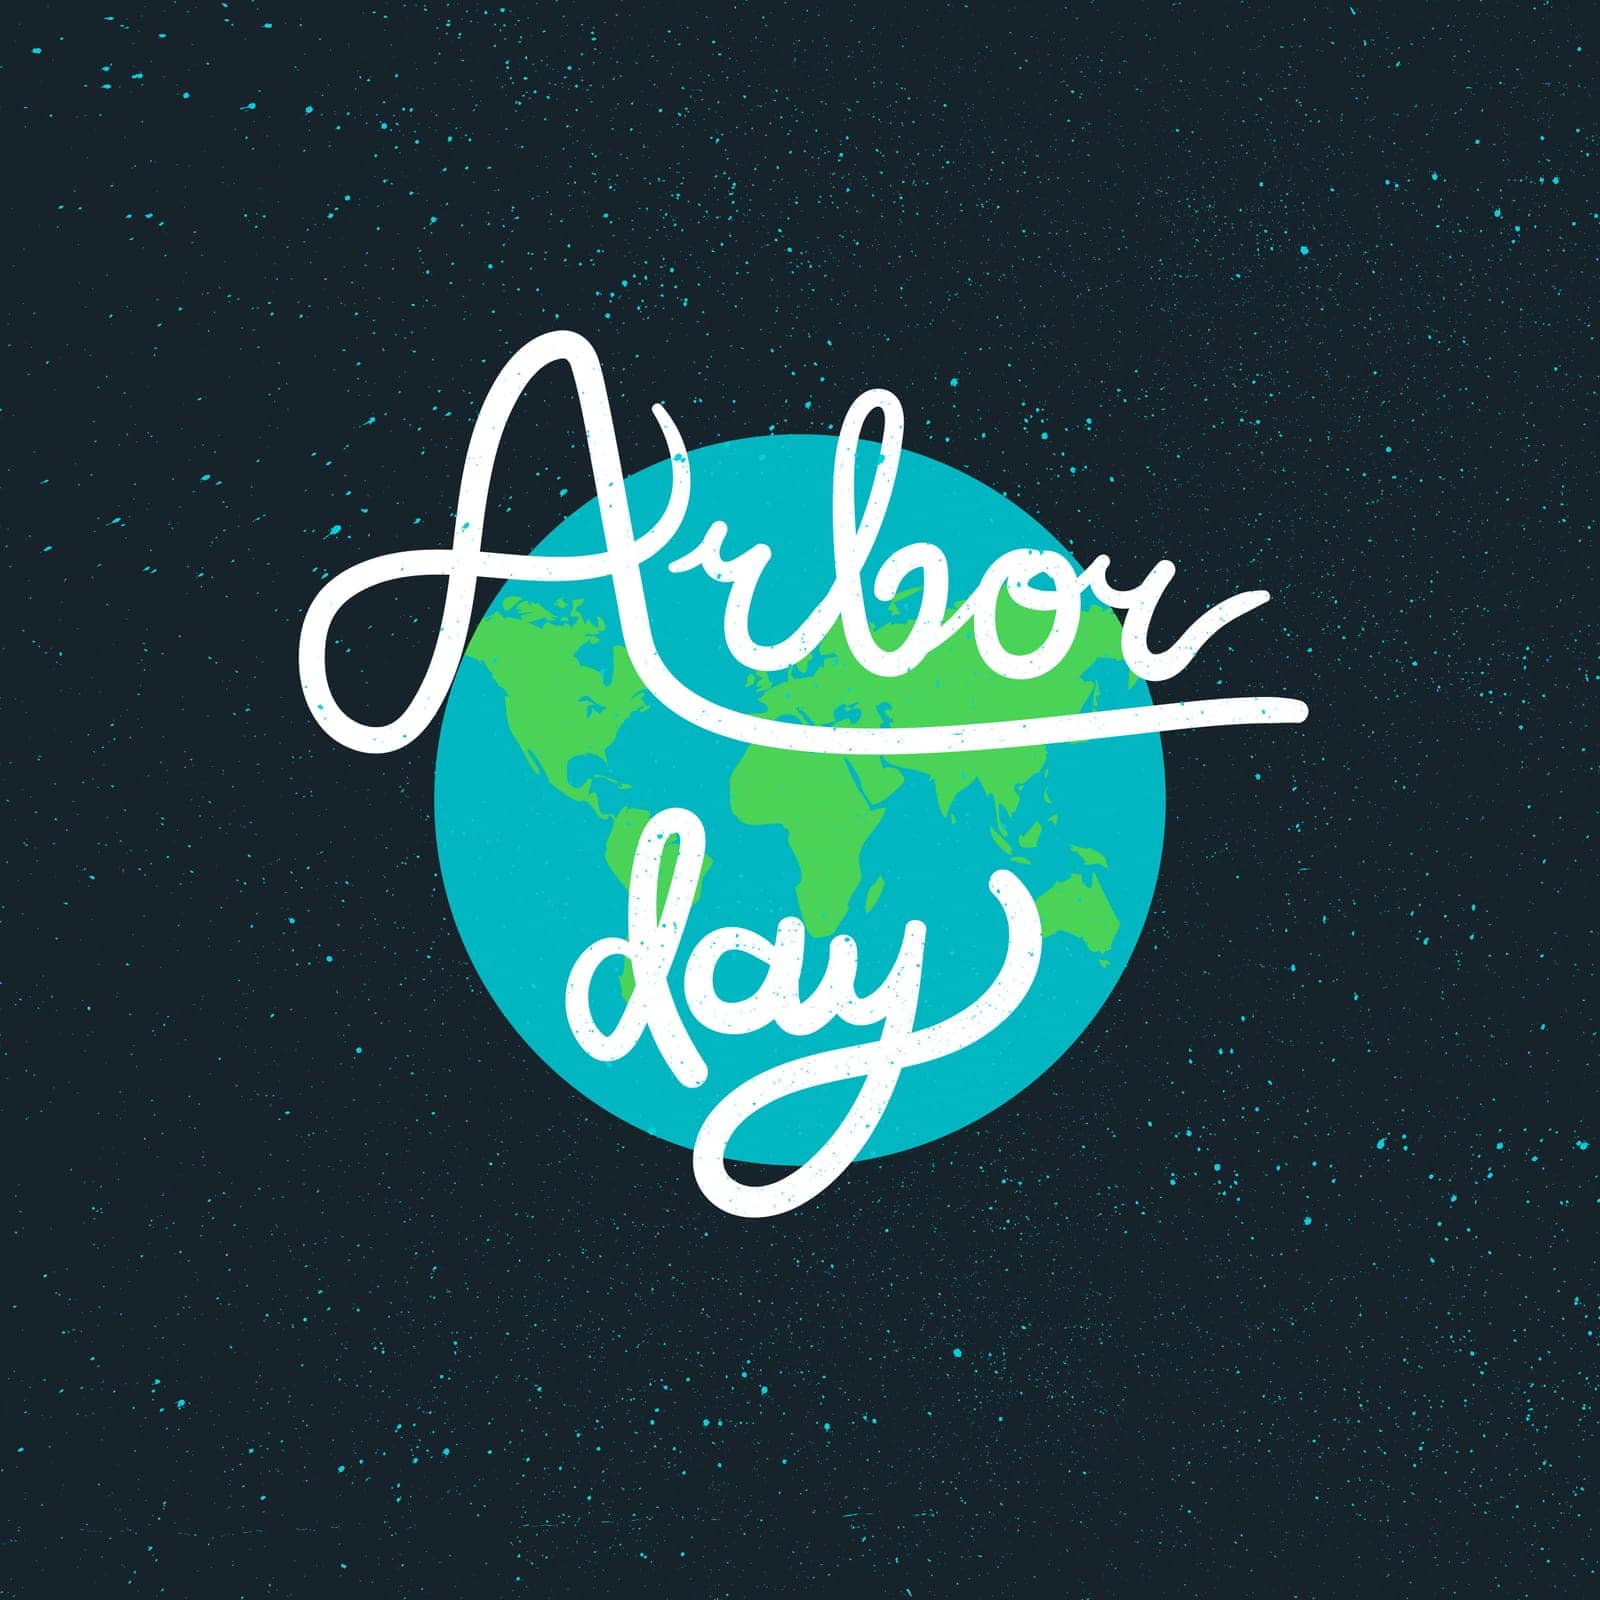 Arbor Day Greeting by barsrsind